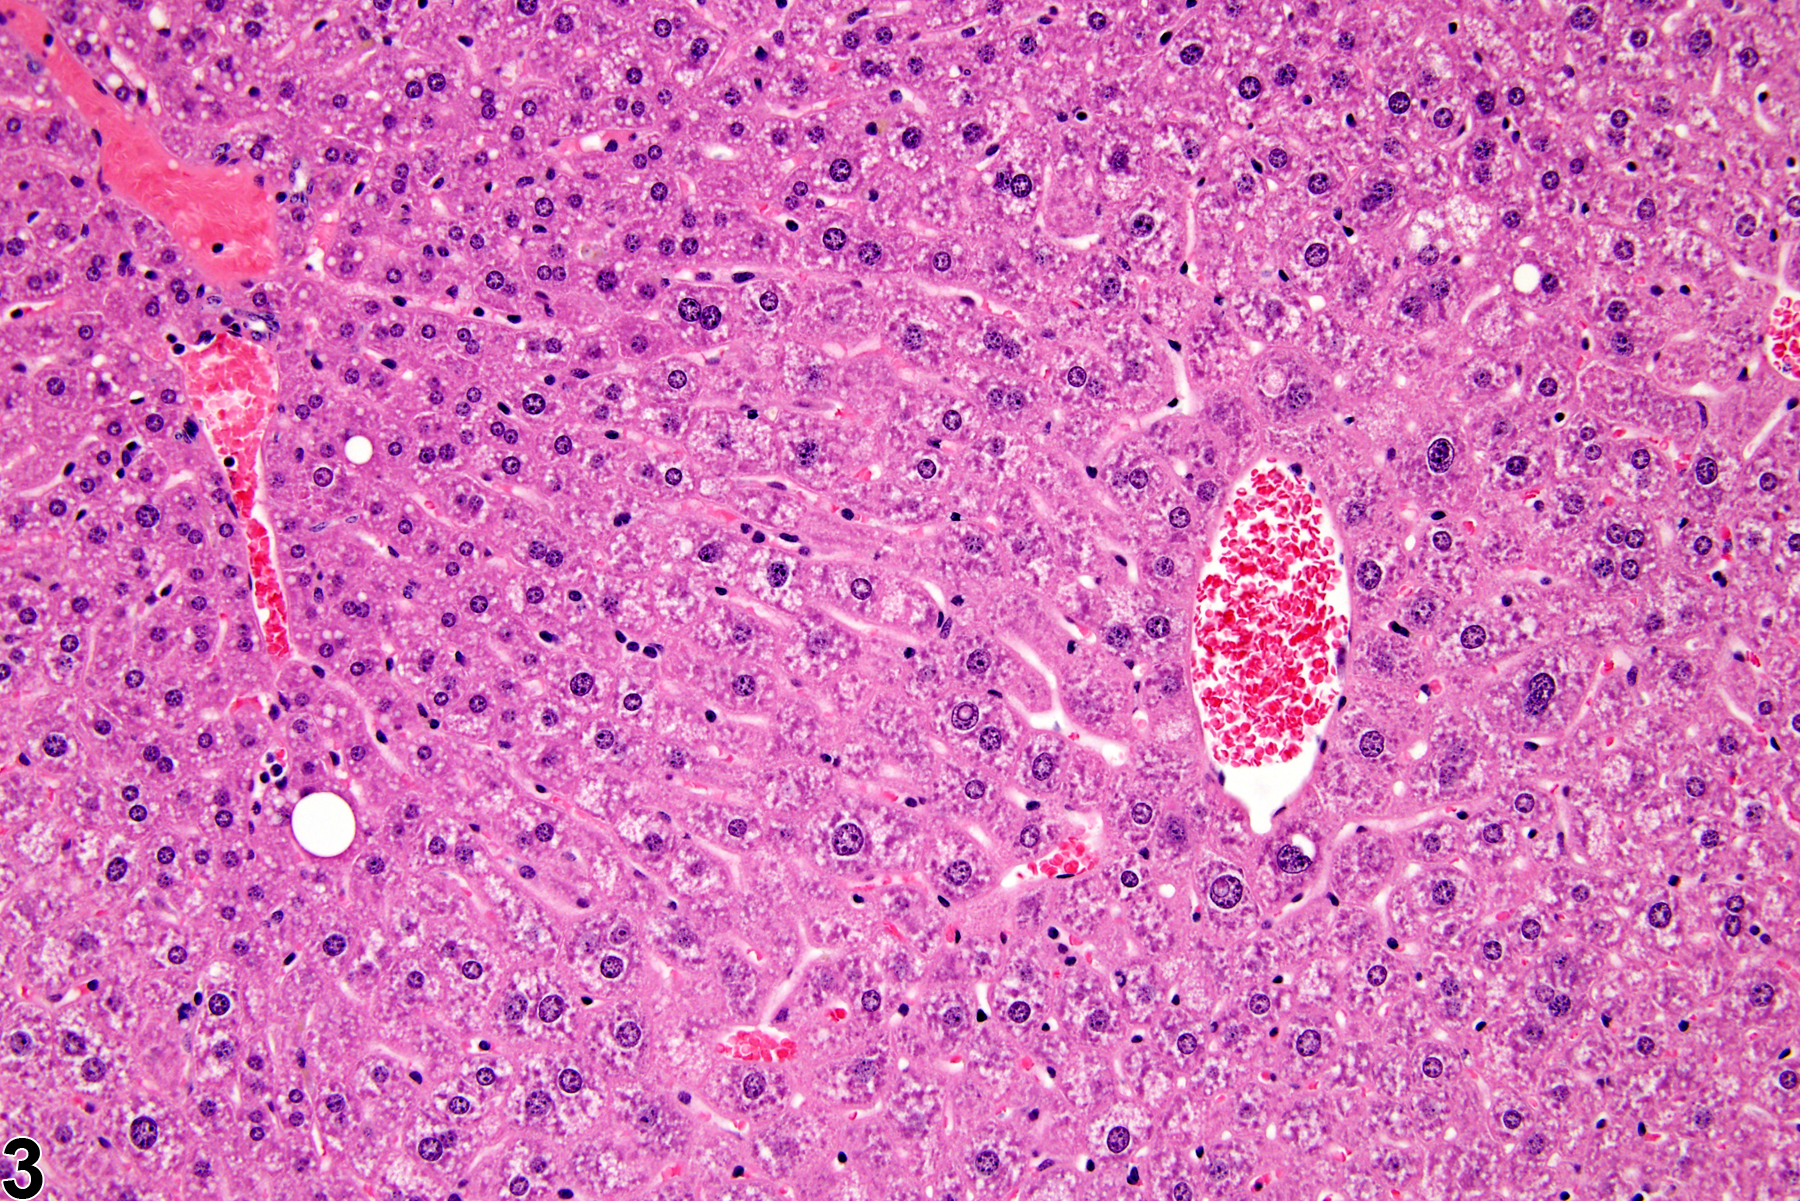 Image of hypertrophy in the liver from a male  B6C3F1 mouse in a chronic study